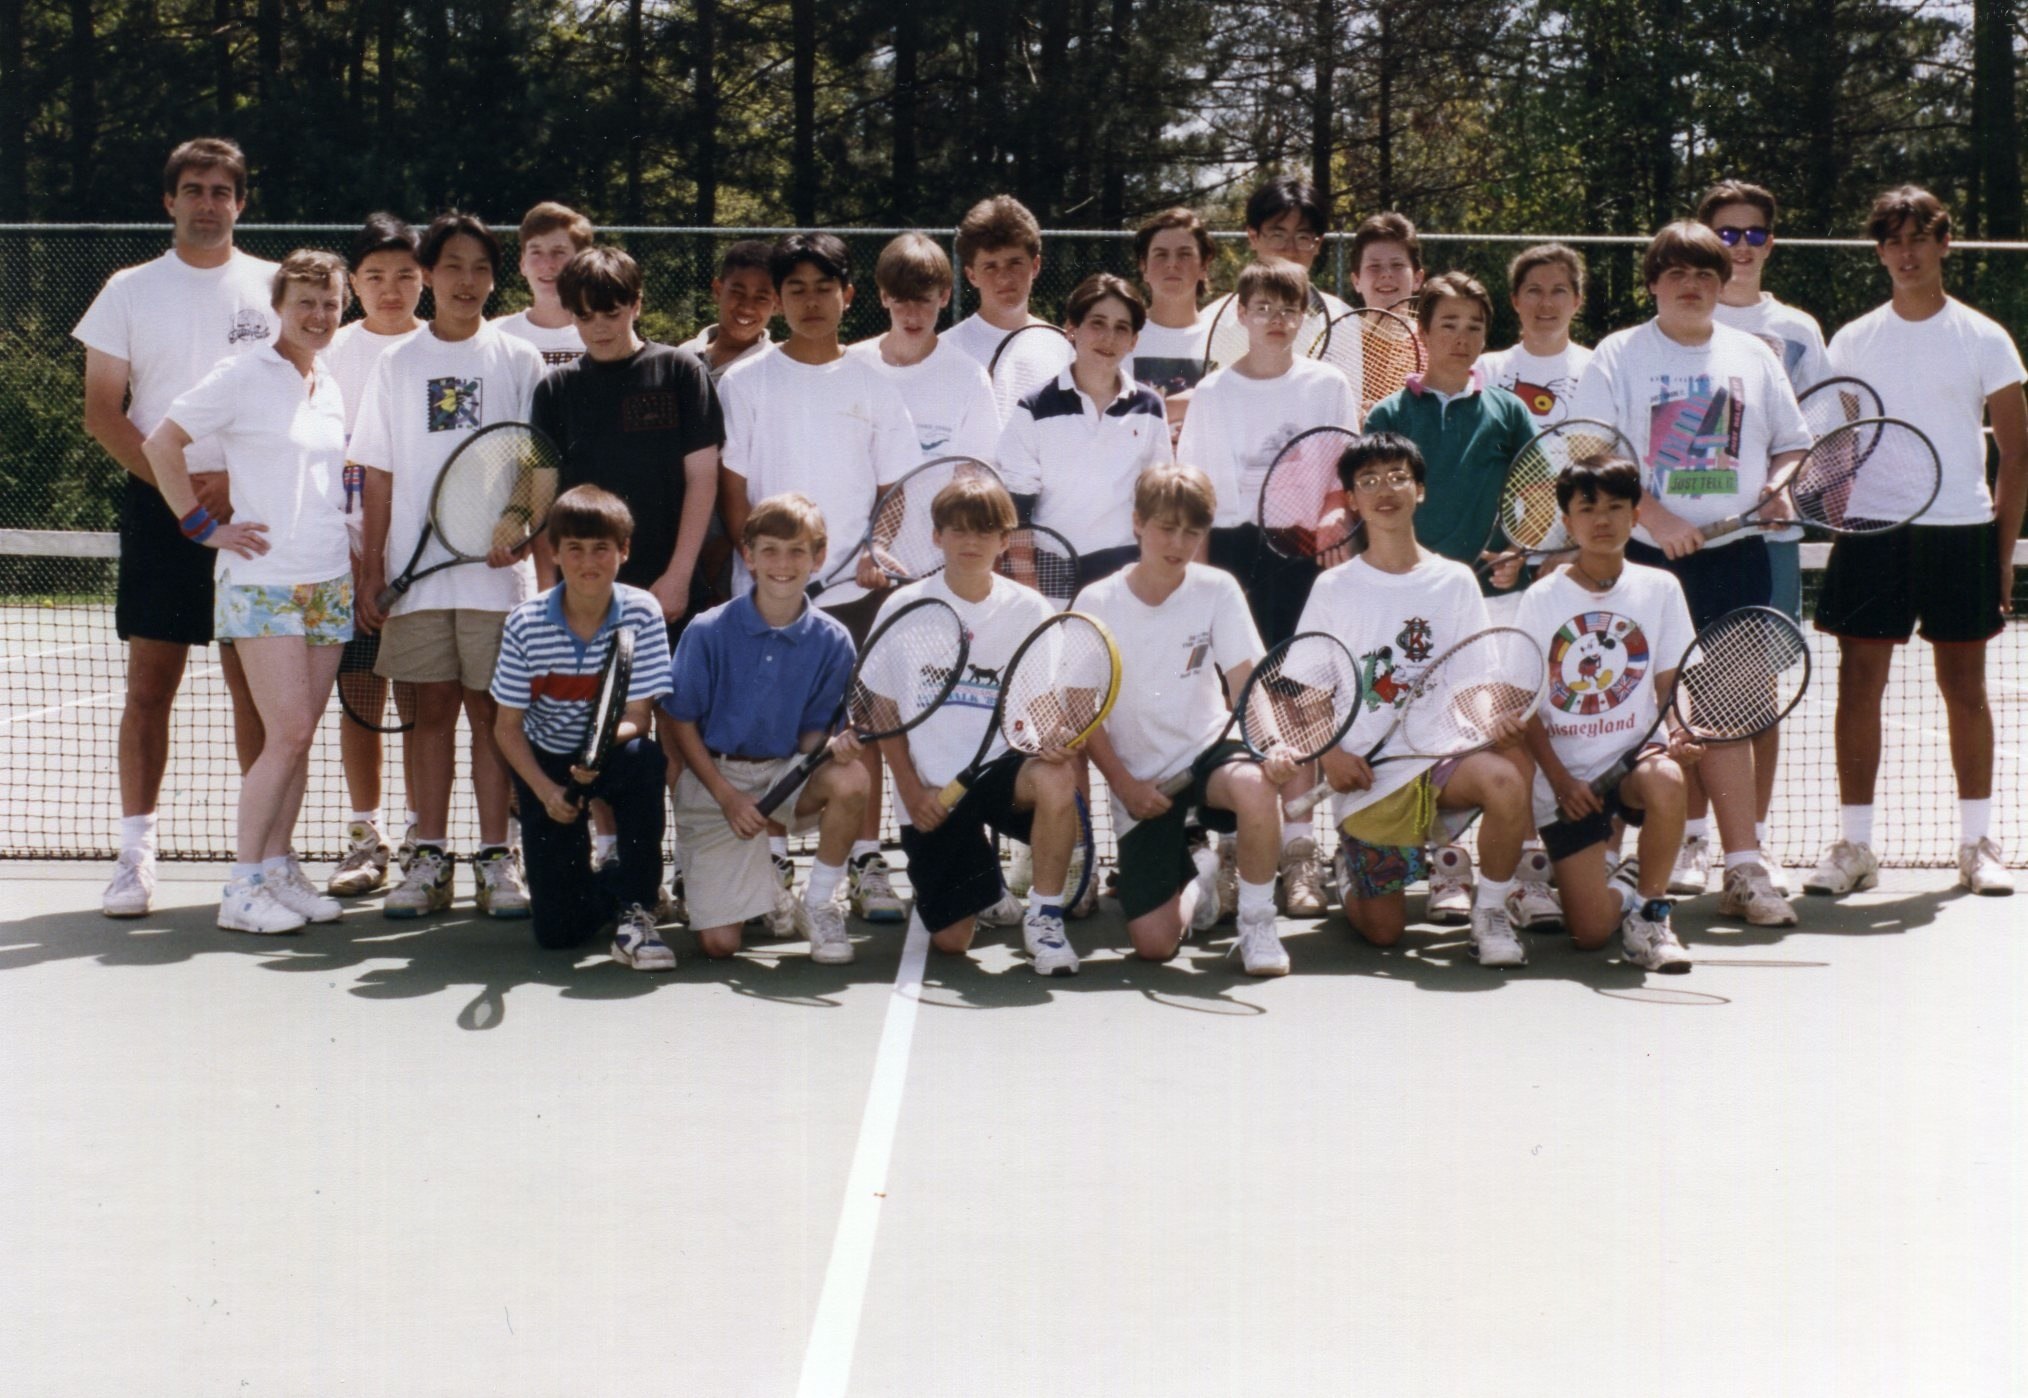 a large group of people holding rackets on a tennis court